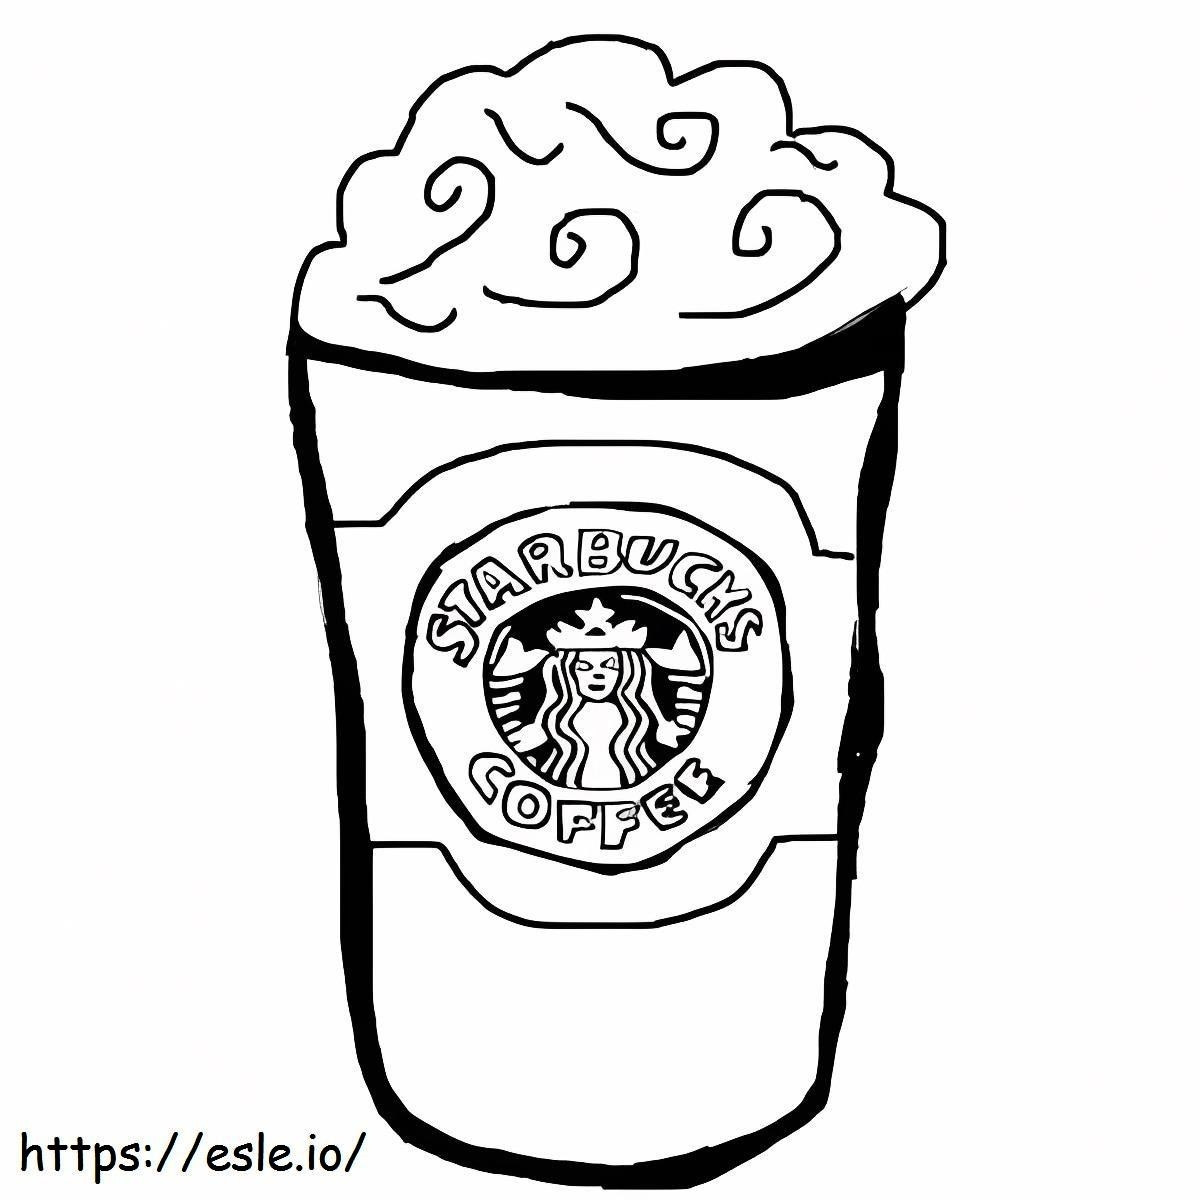 Cup Of Starbucks Coffee coloring page